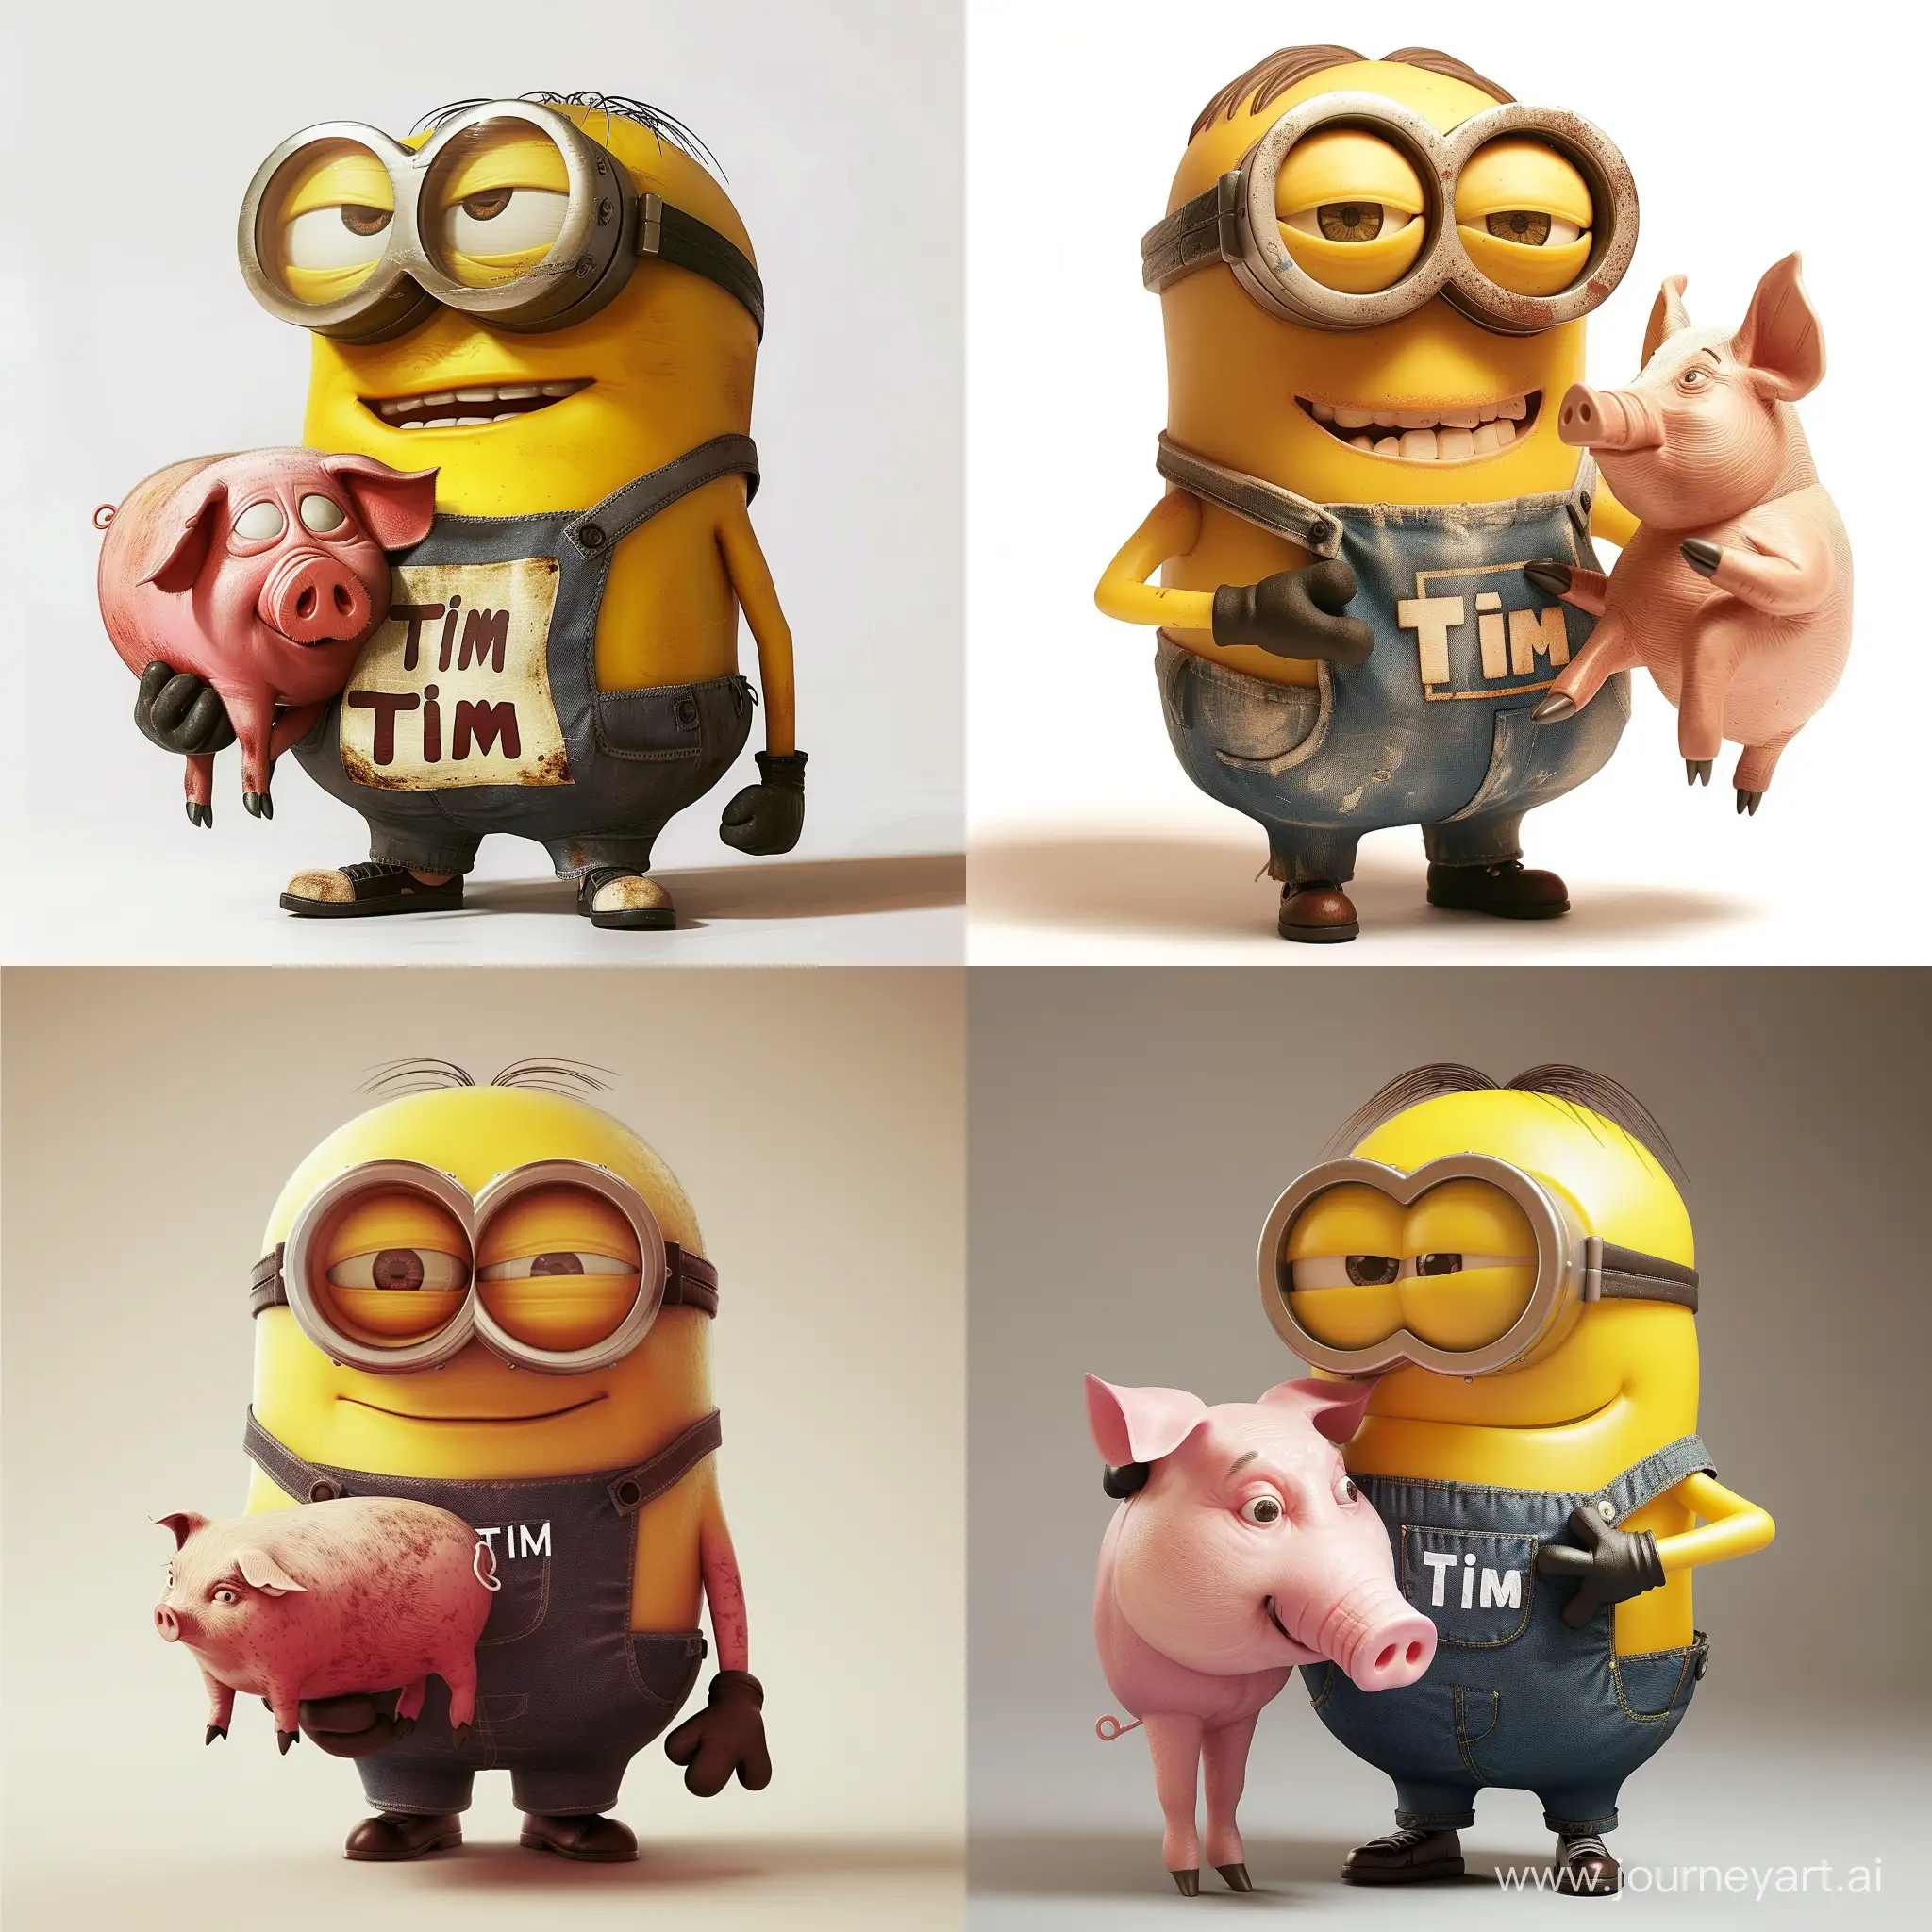 Muscular-Tim-Minion-Holding-Pig-Fitness-Enthusiast-Character-Art